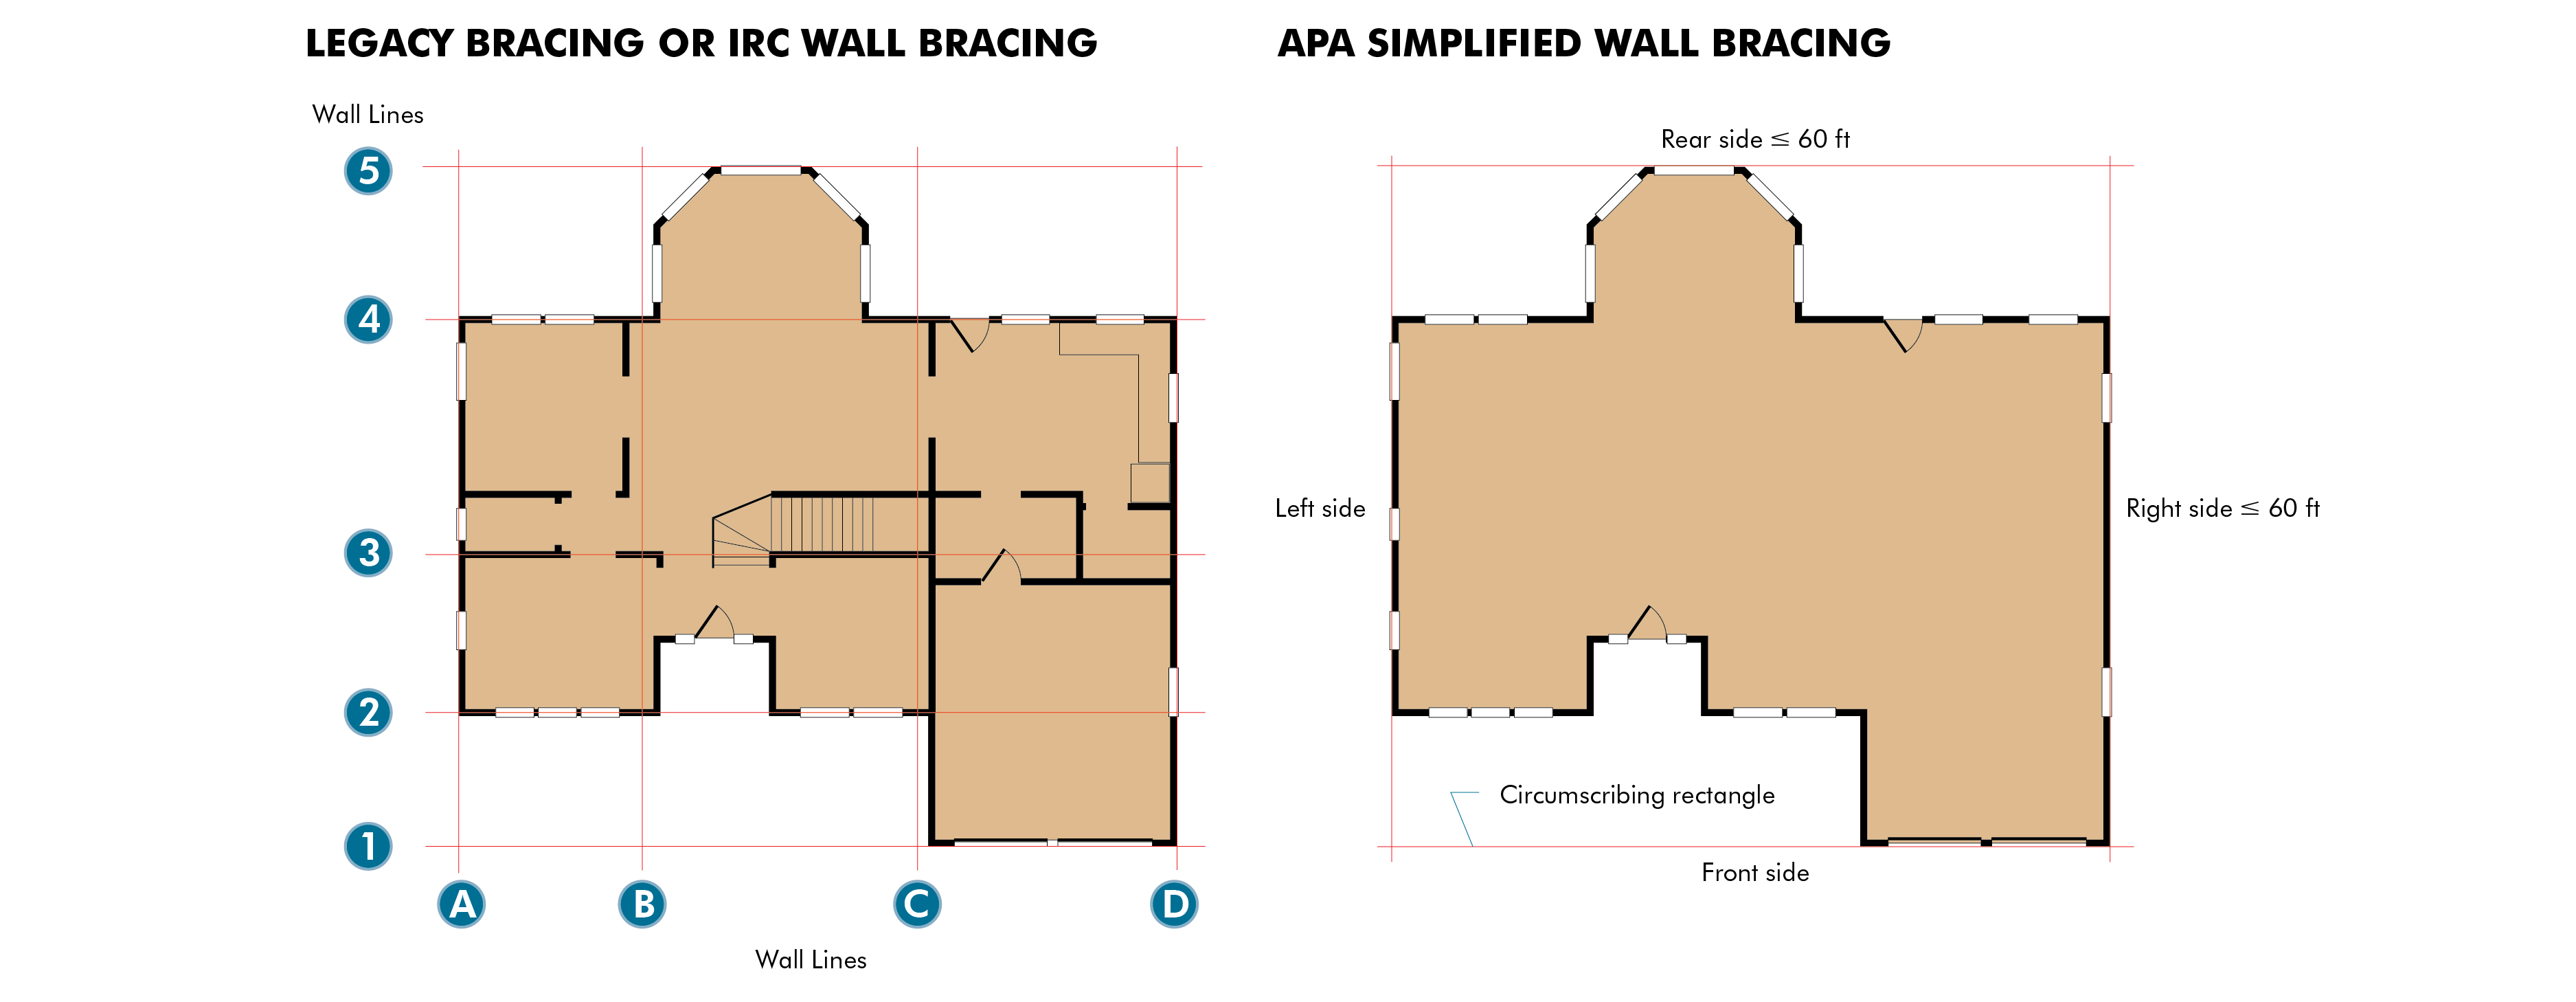 Traditional wall bracing compared with the APA Simplified Wall Bracing Method